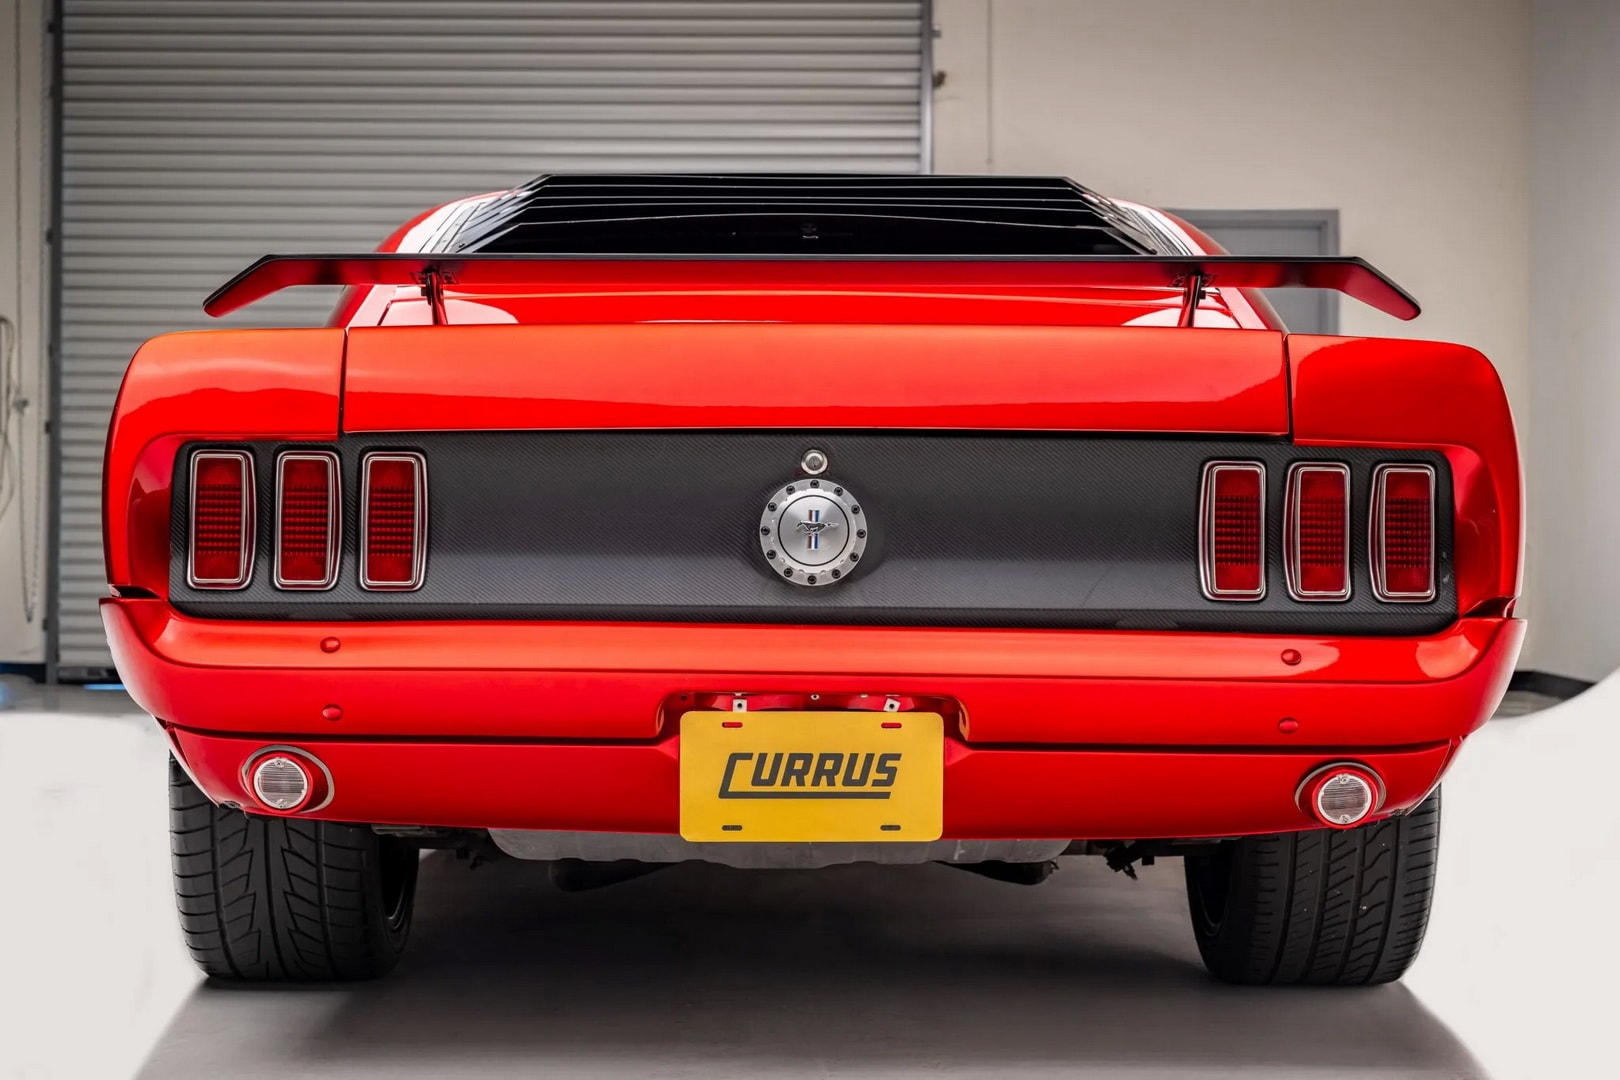 Analysis of 1969 Mustang Mach 1 Auction Disappointment